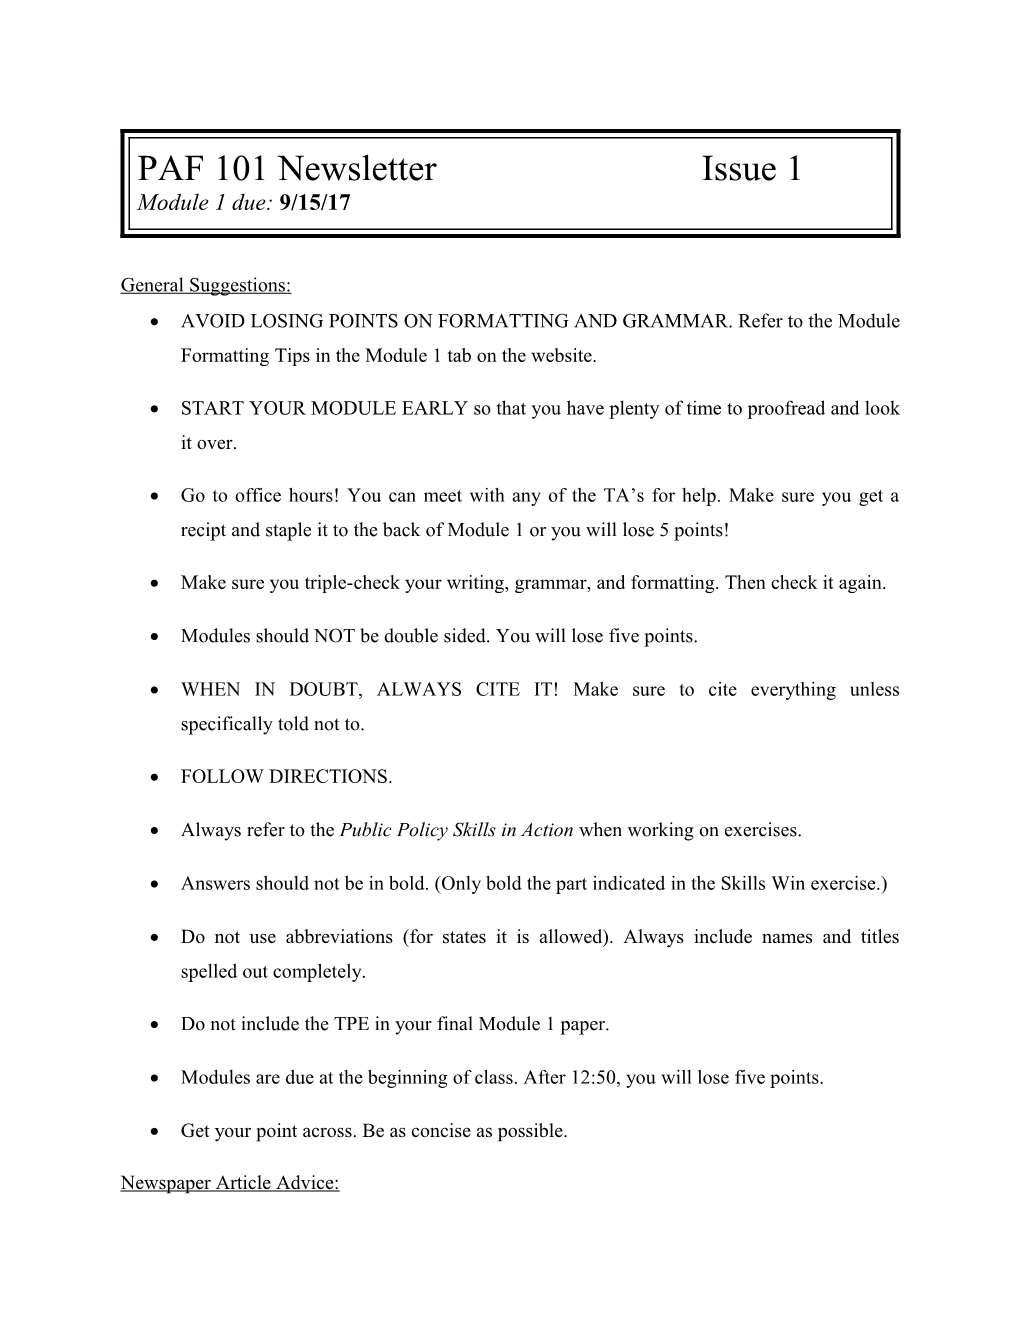 PAF 101 Newsletter Issue 1